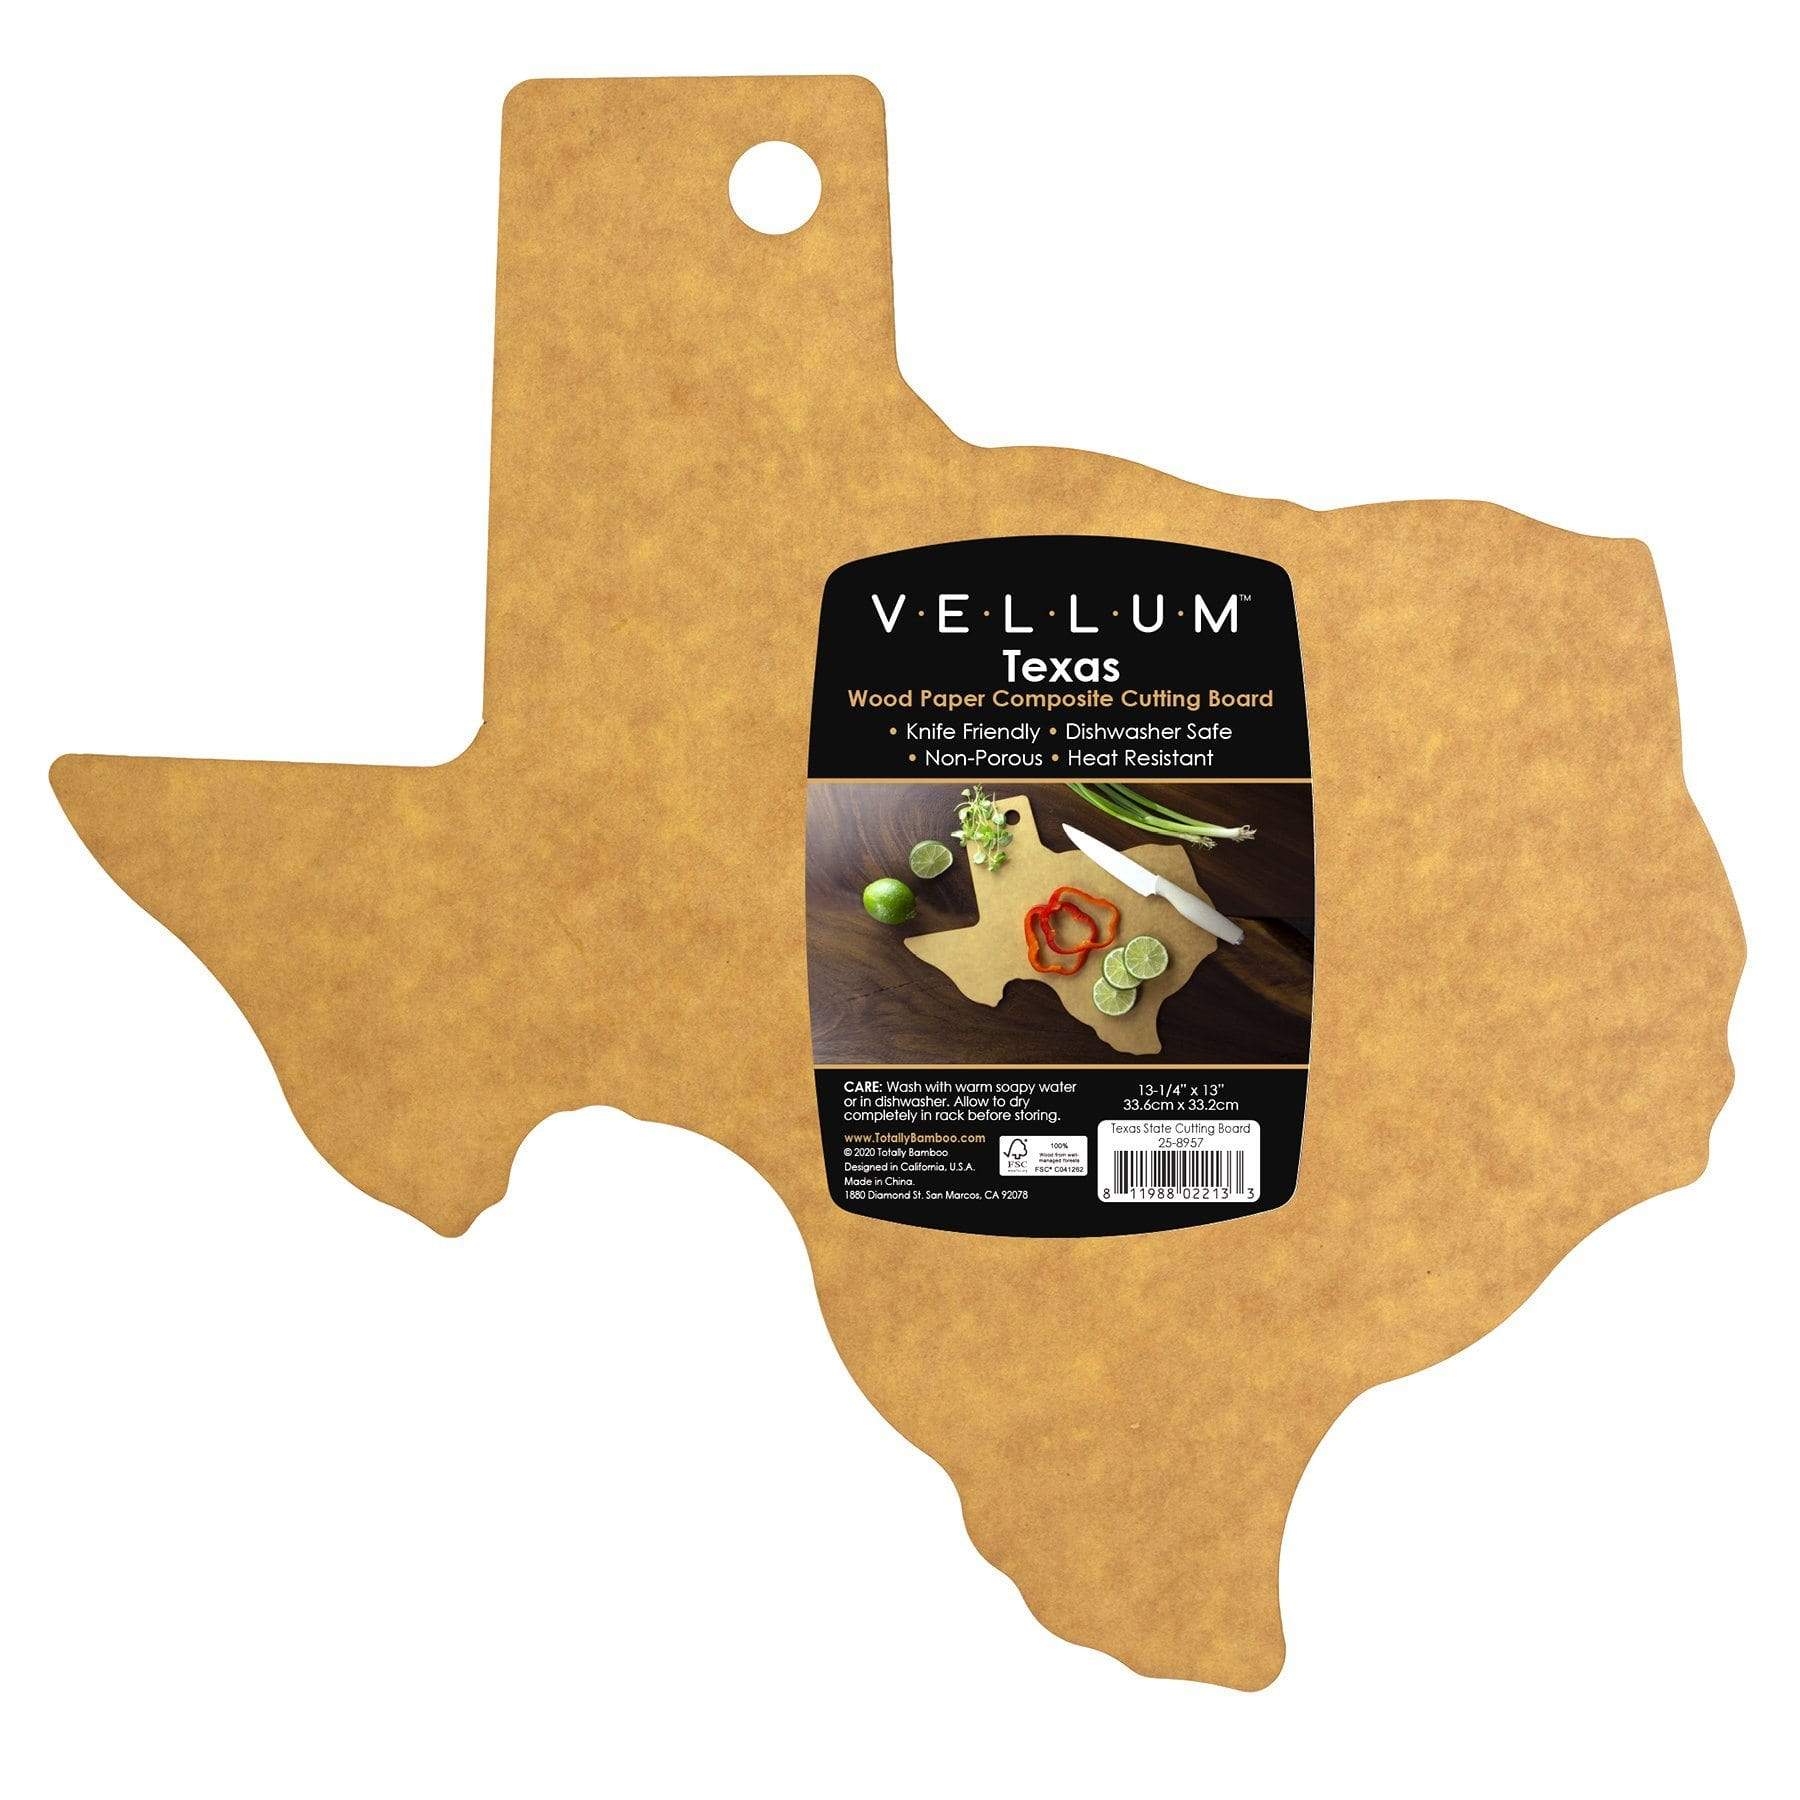 Totally Bamboo Vellum™ Texas Shaped Wood Paper Composite Serving and Cutting Board, 13-1/4" x 13" | Dishwasher Safe